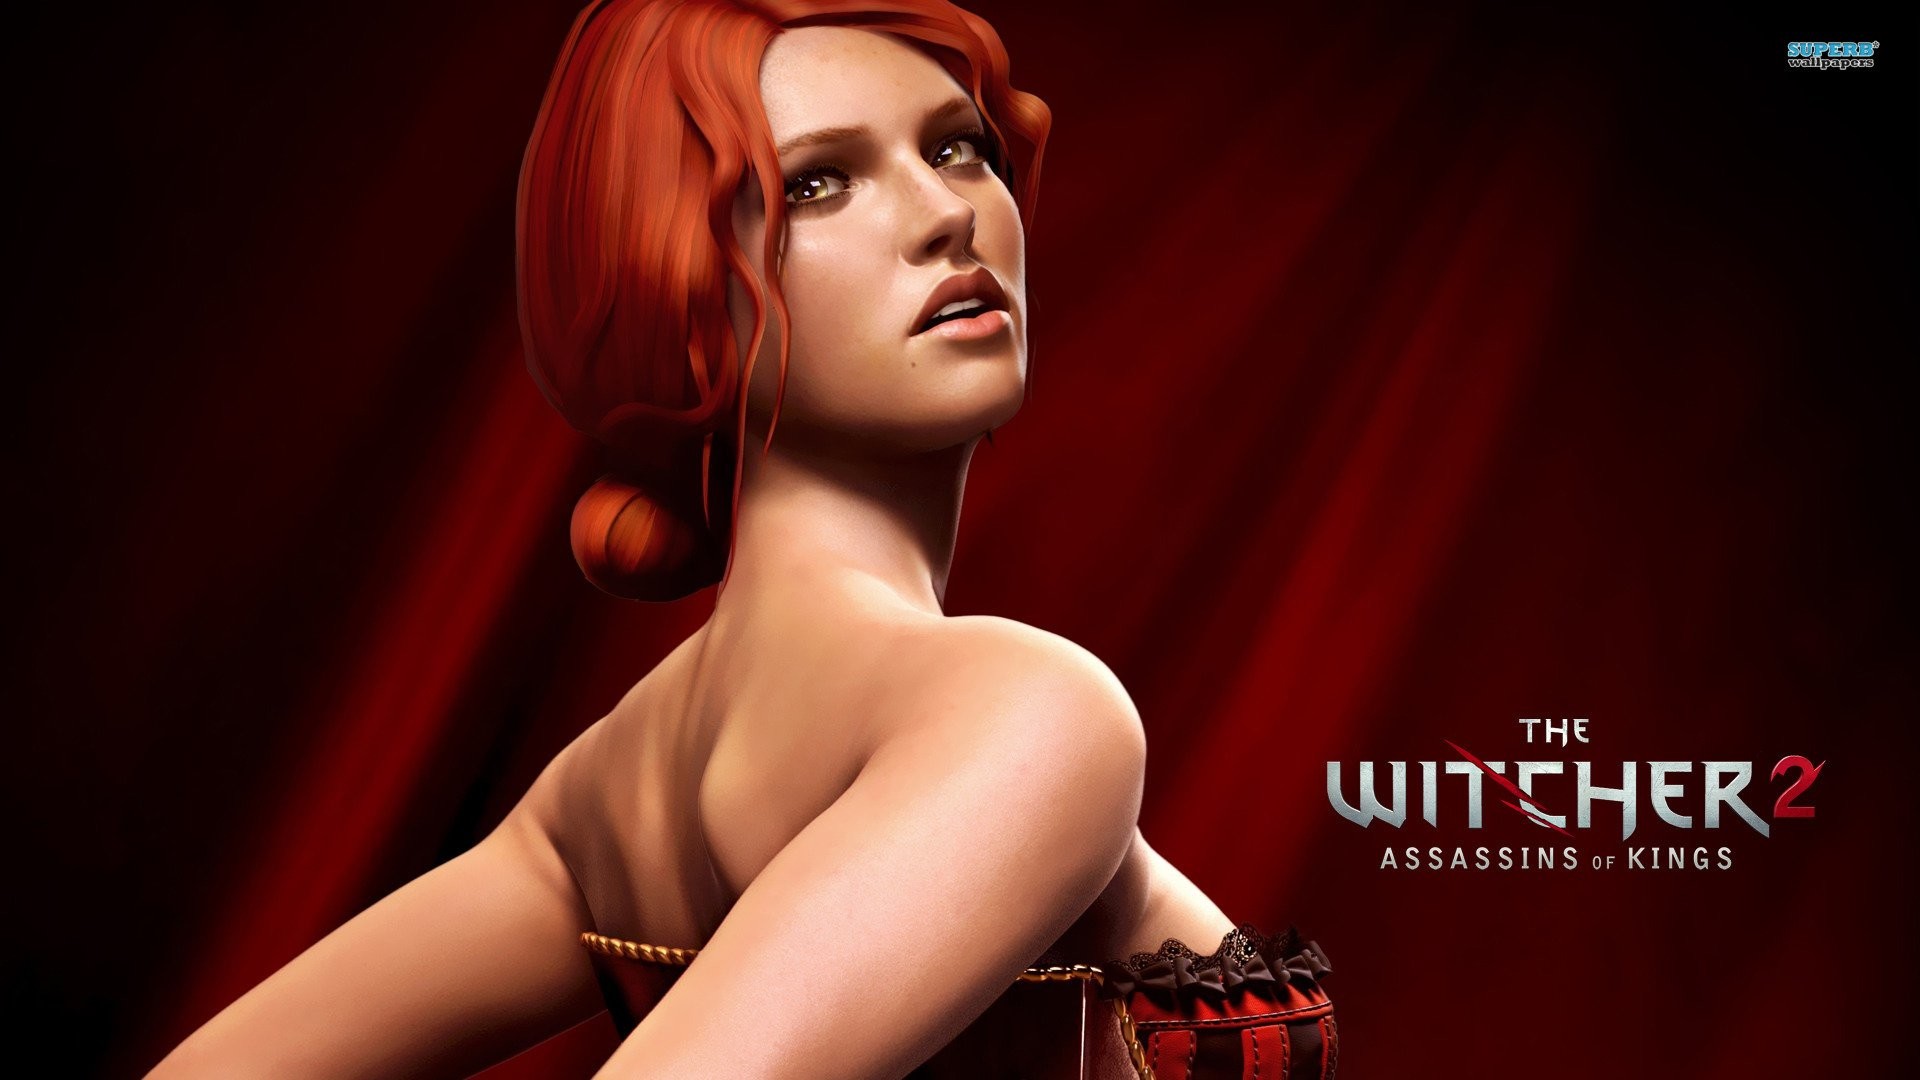 Triss Merigold – The Witcher 2 Assassins Of Kings 446646